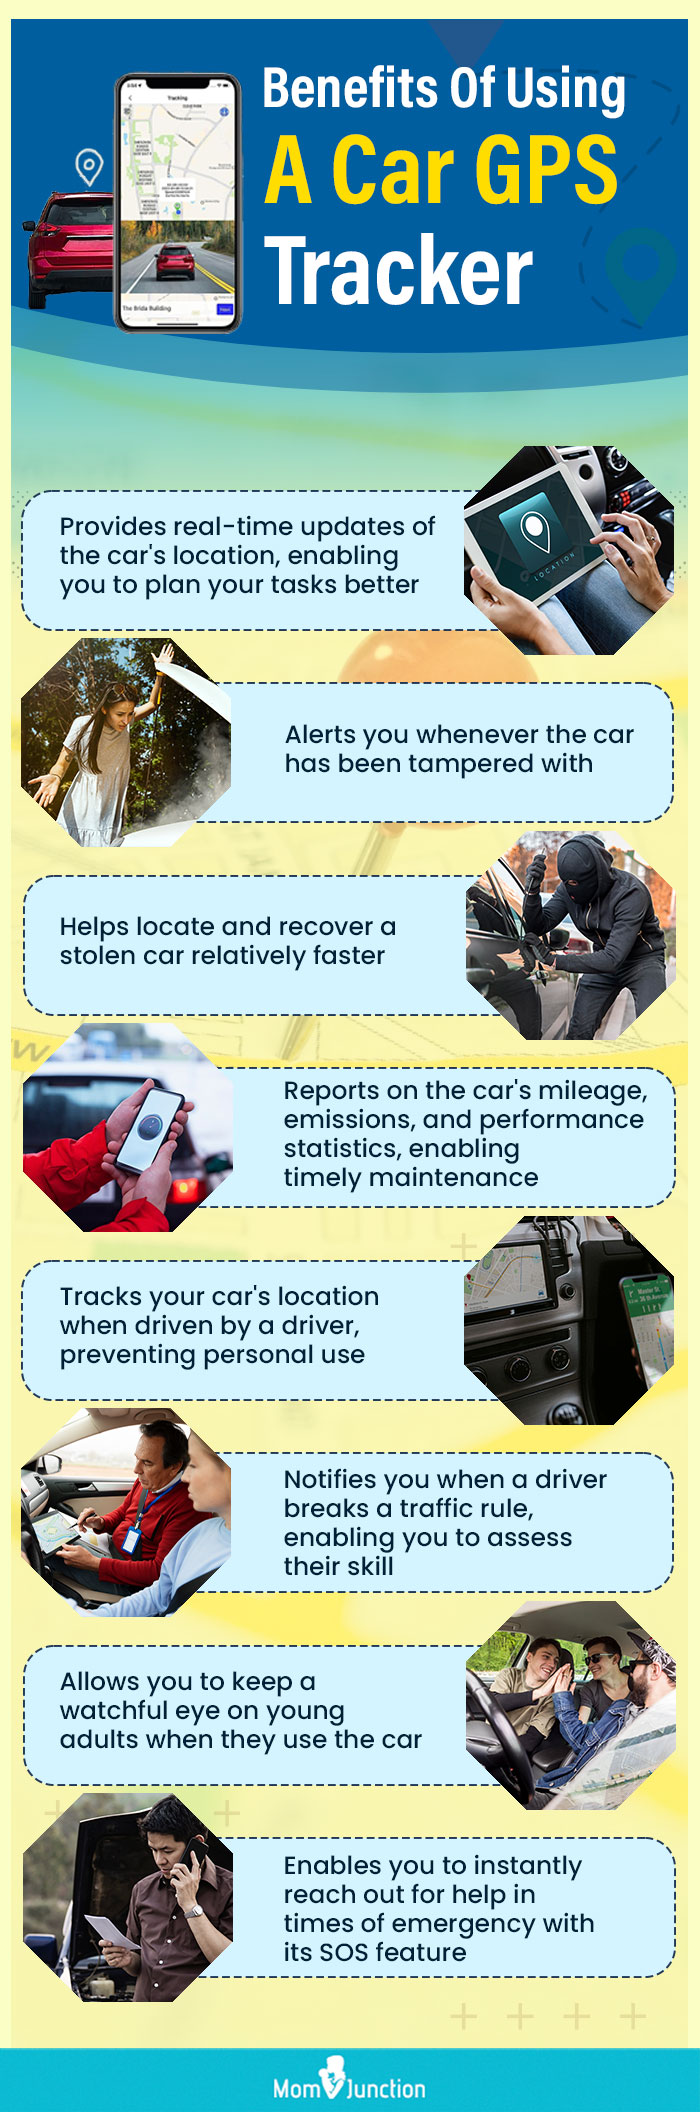 Benefits Of Using A Car GPS Tracker (infographic)